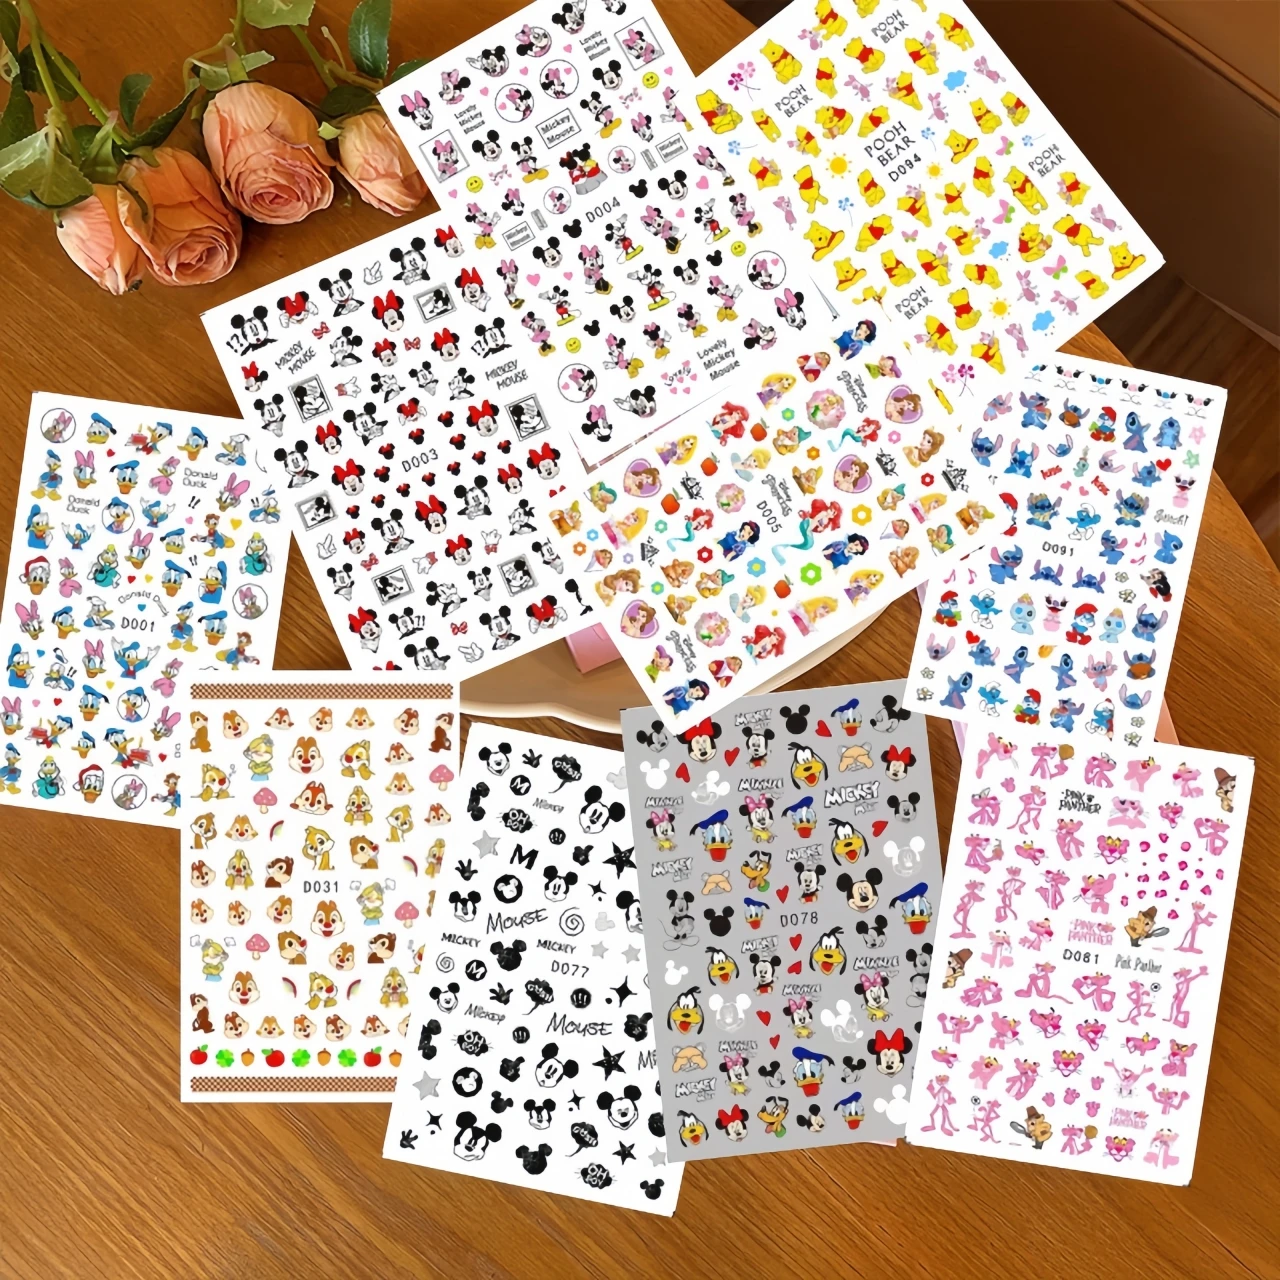 

New Disney Cartoon Stickers Anime Pooh Bear Stickers For Nails Animation Press On Nails DlY Mickey Donald Duck Sliders For Nails